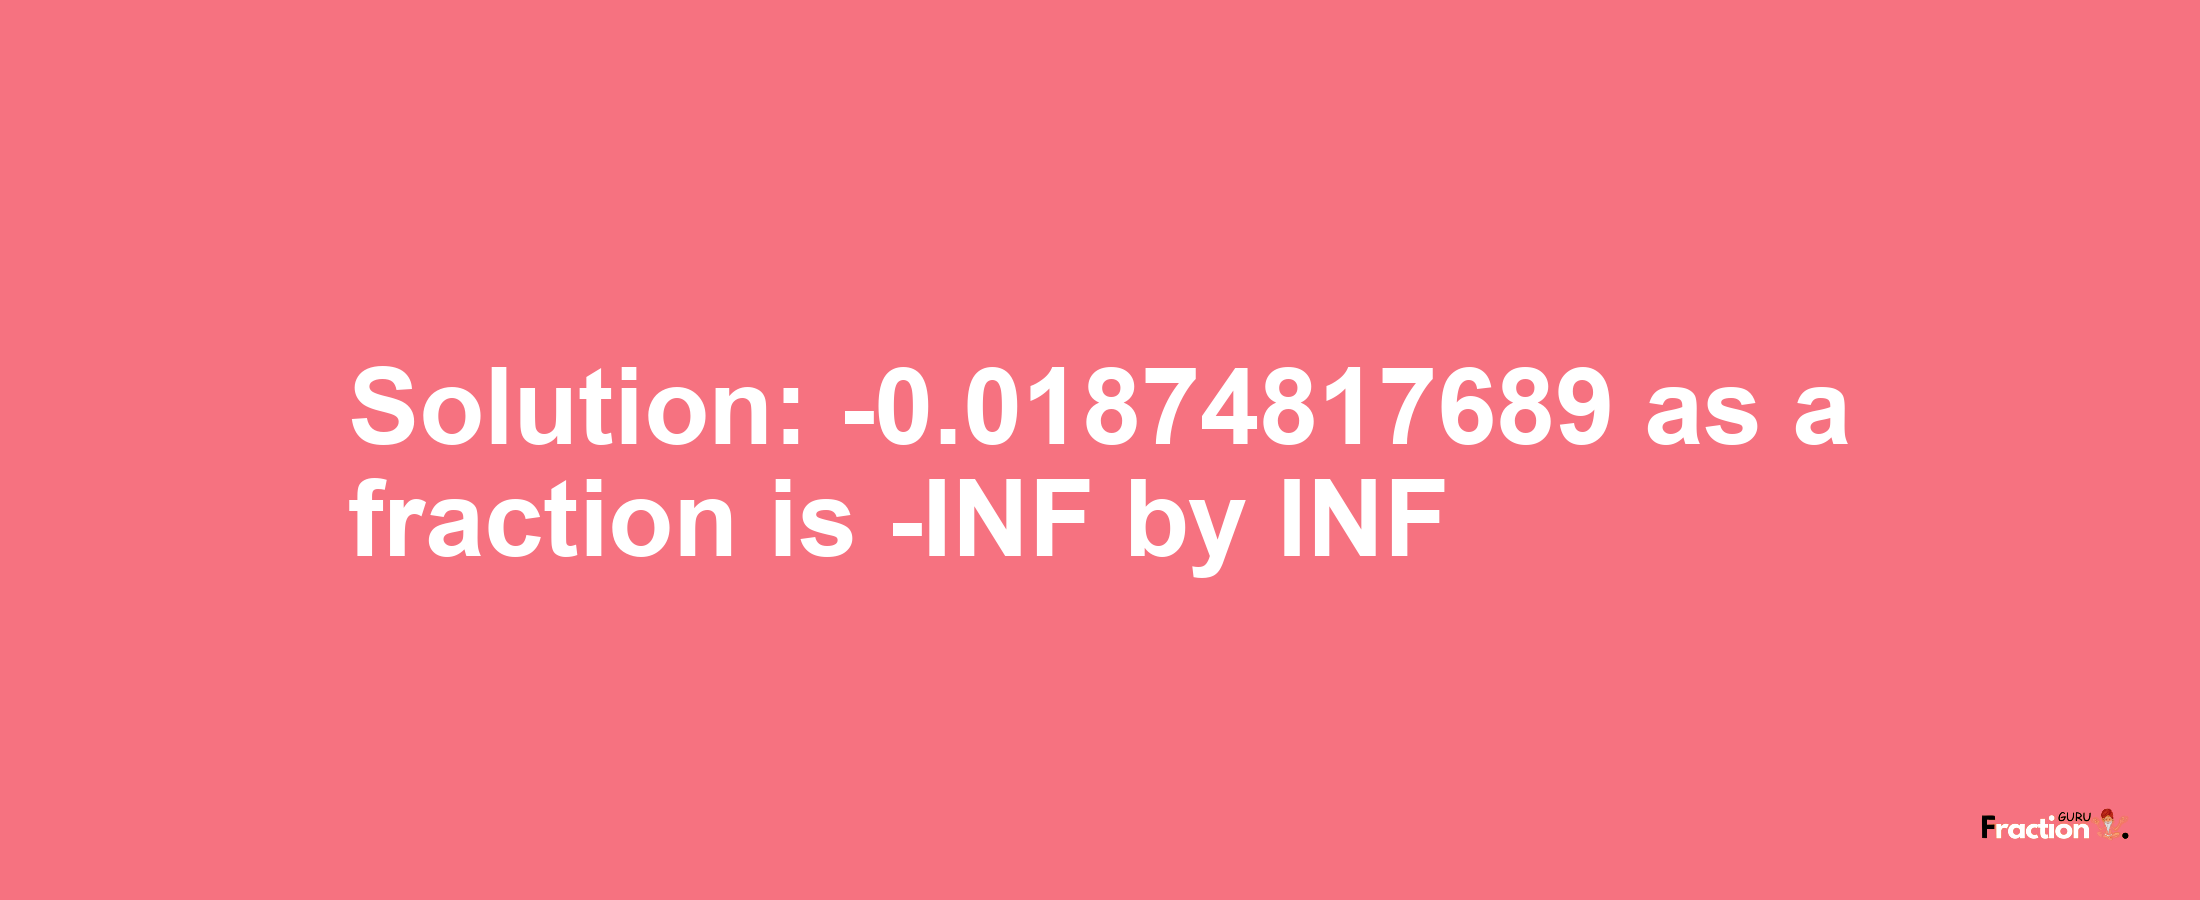 Solution:-0.01874817689 as a fraction is -INF/INF